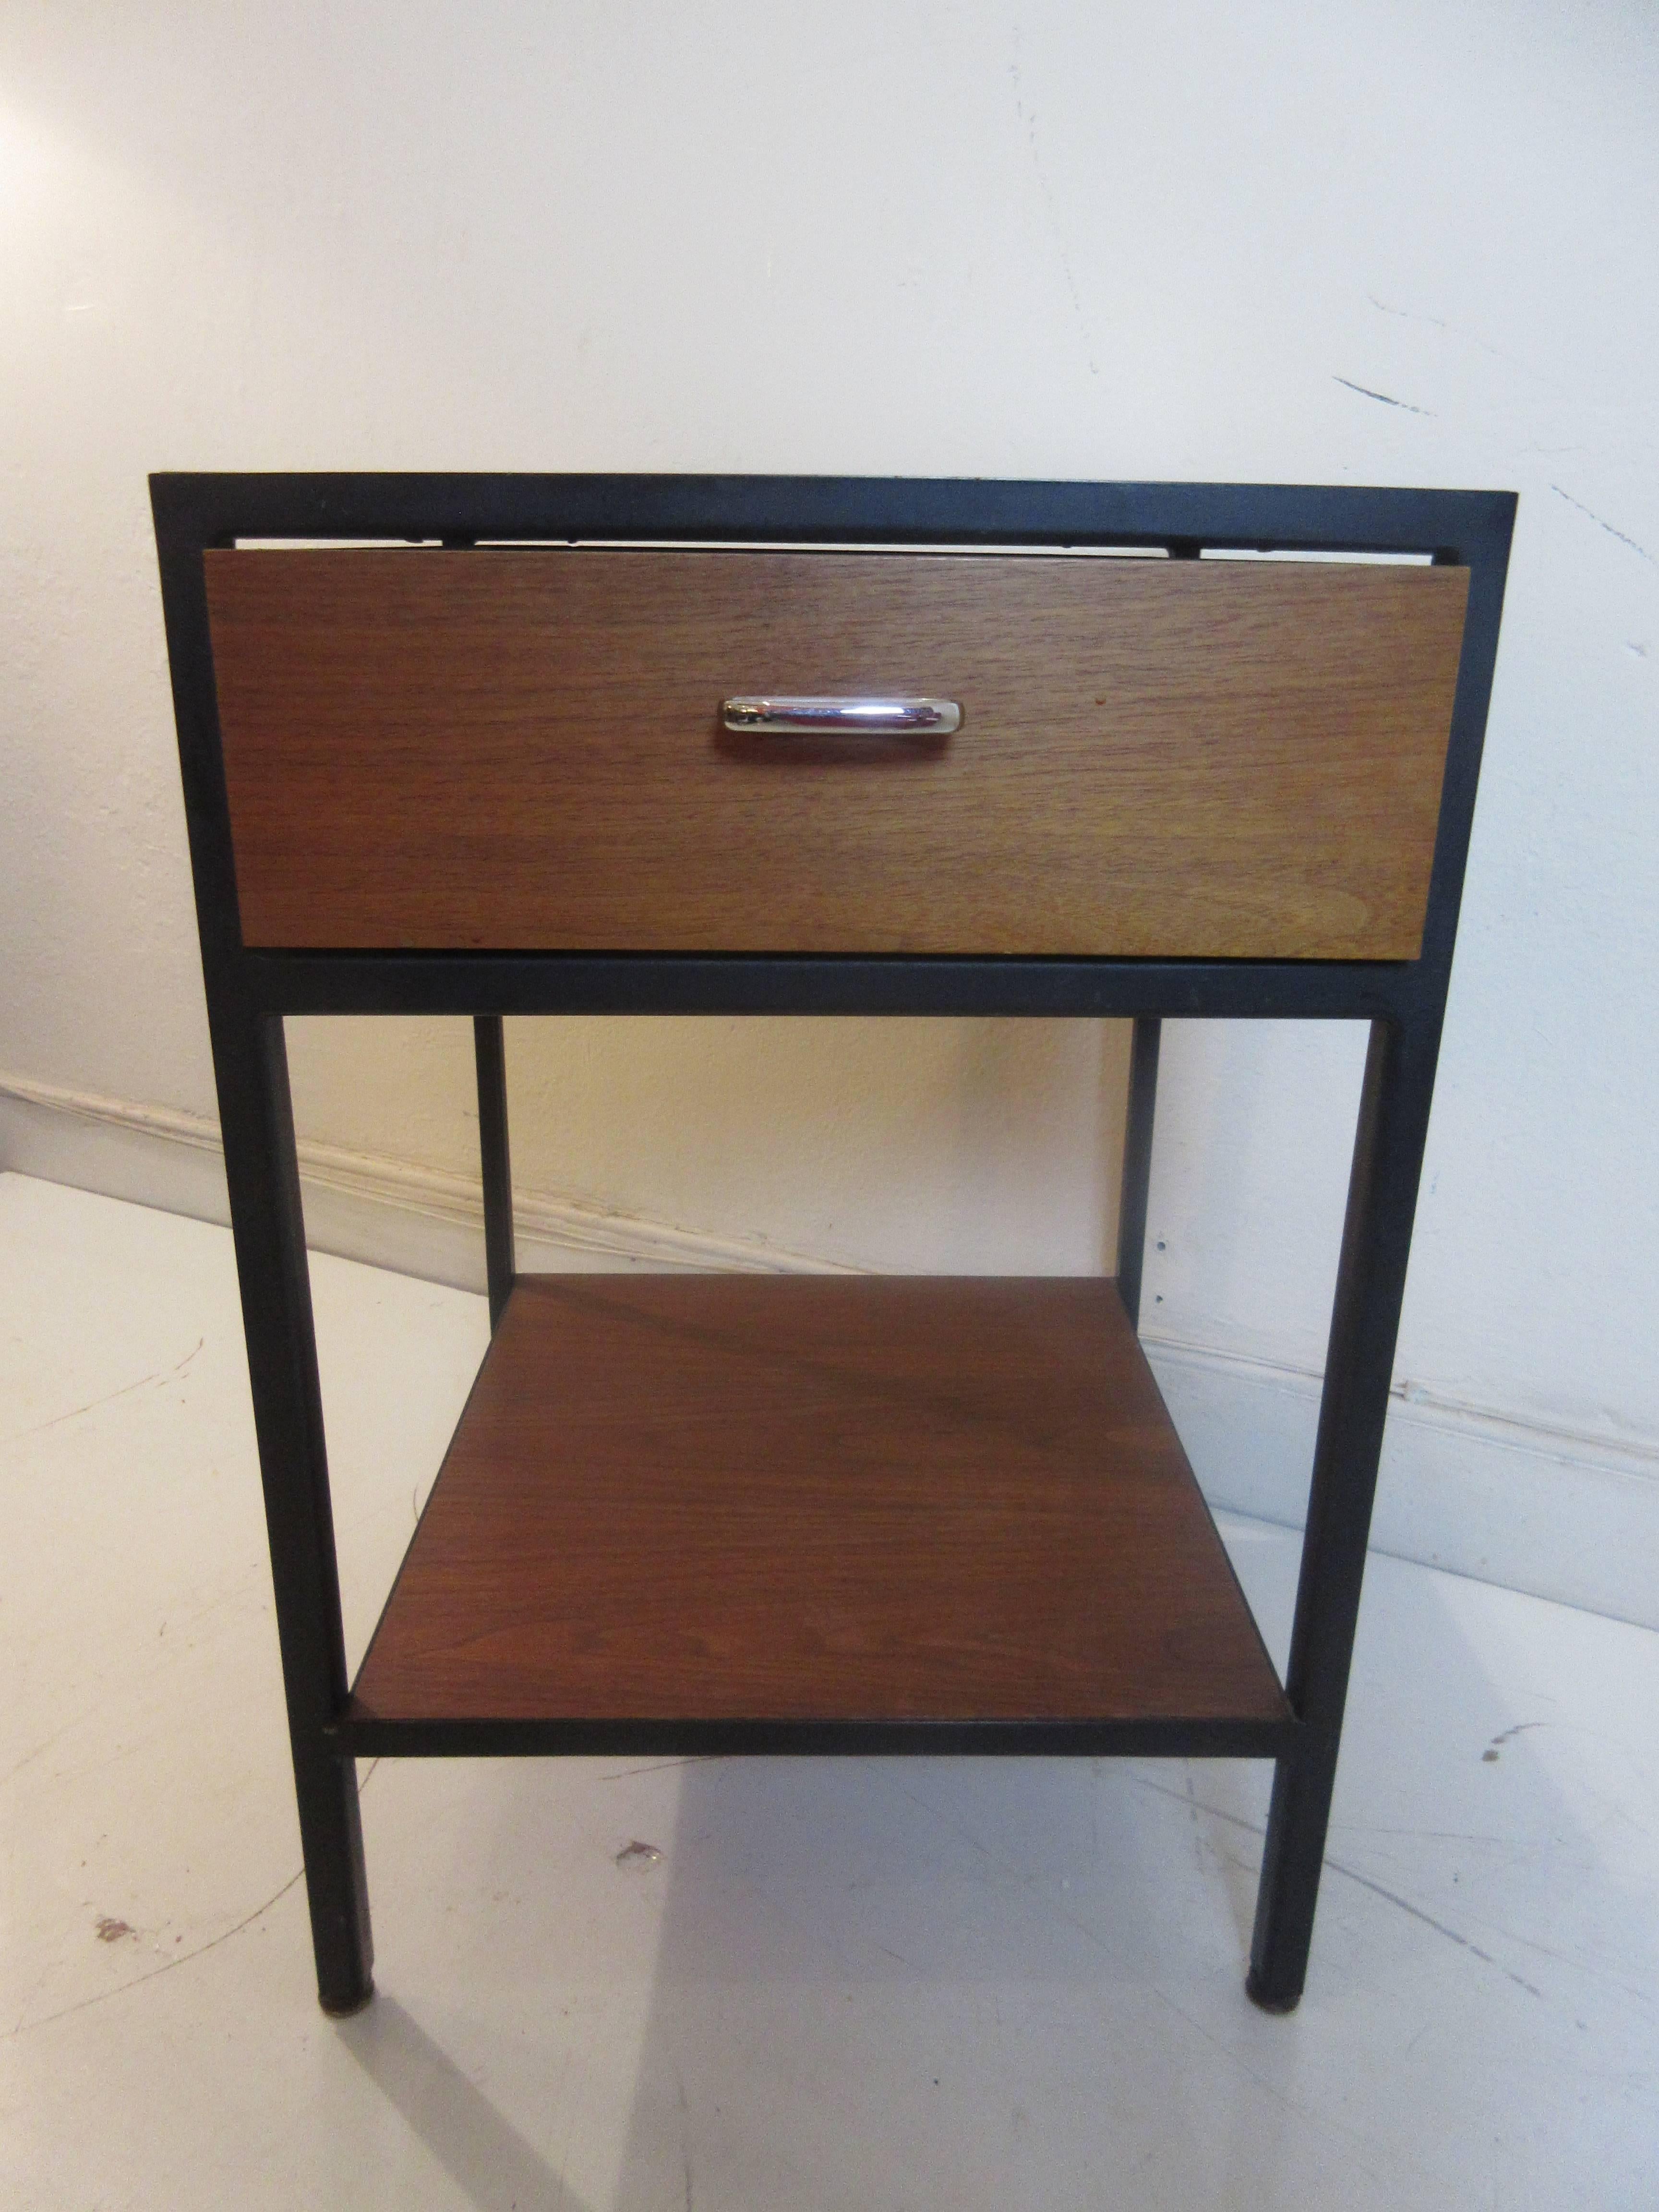 George Nelson for Herman Miller steel case nightstand in walnut panels and black steel frame. It retains its original foil Herman Miller tag. Laminate in great condition as is wood and paint on steel.